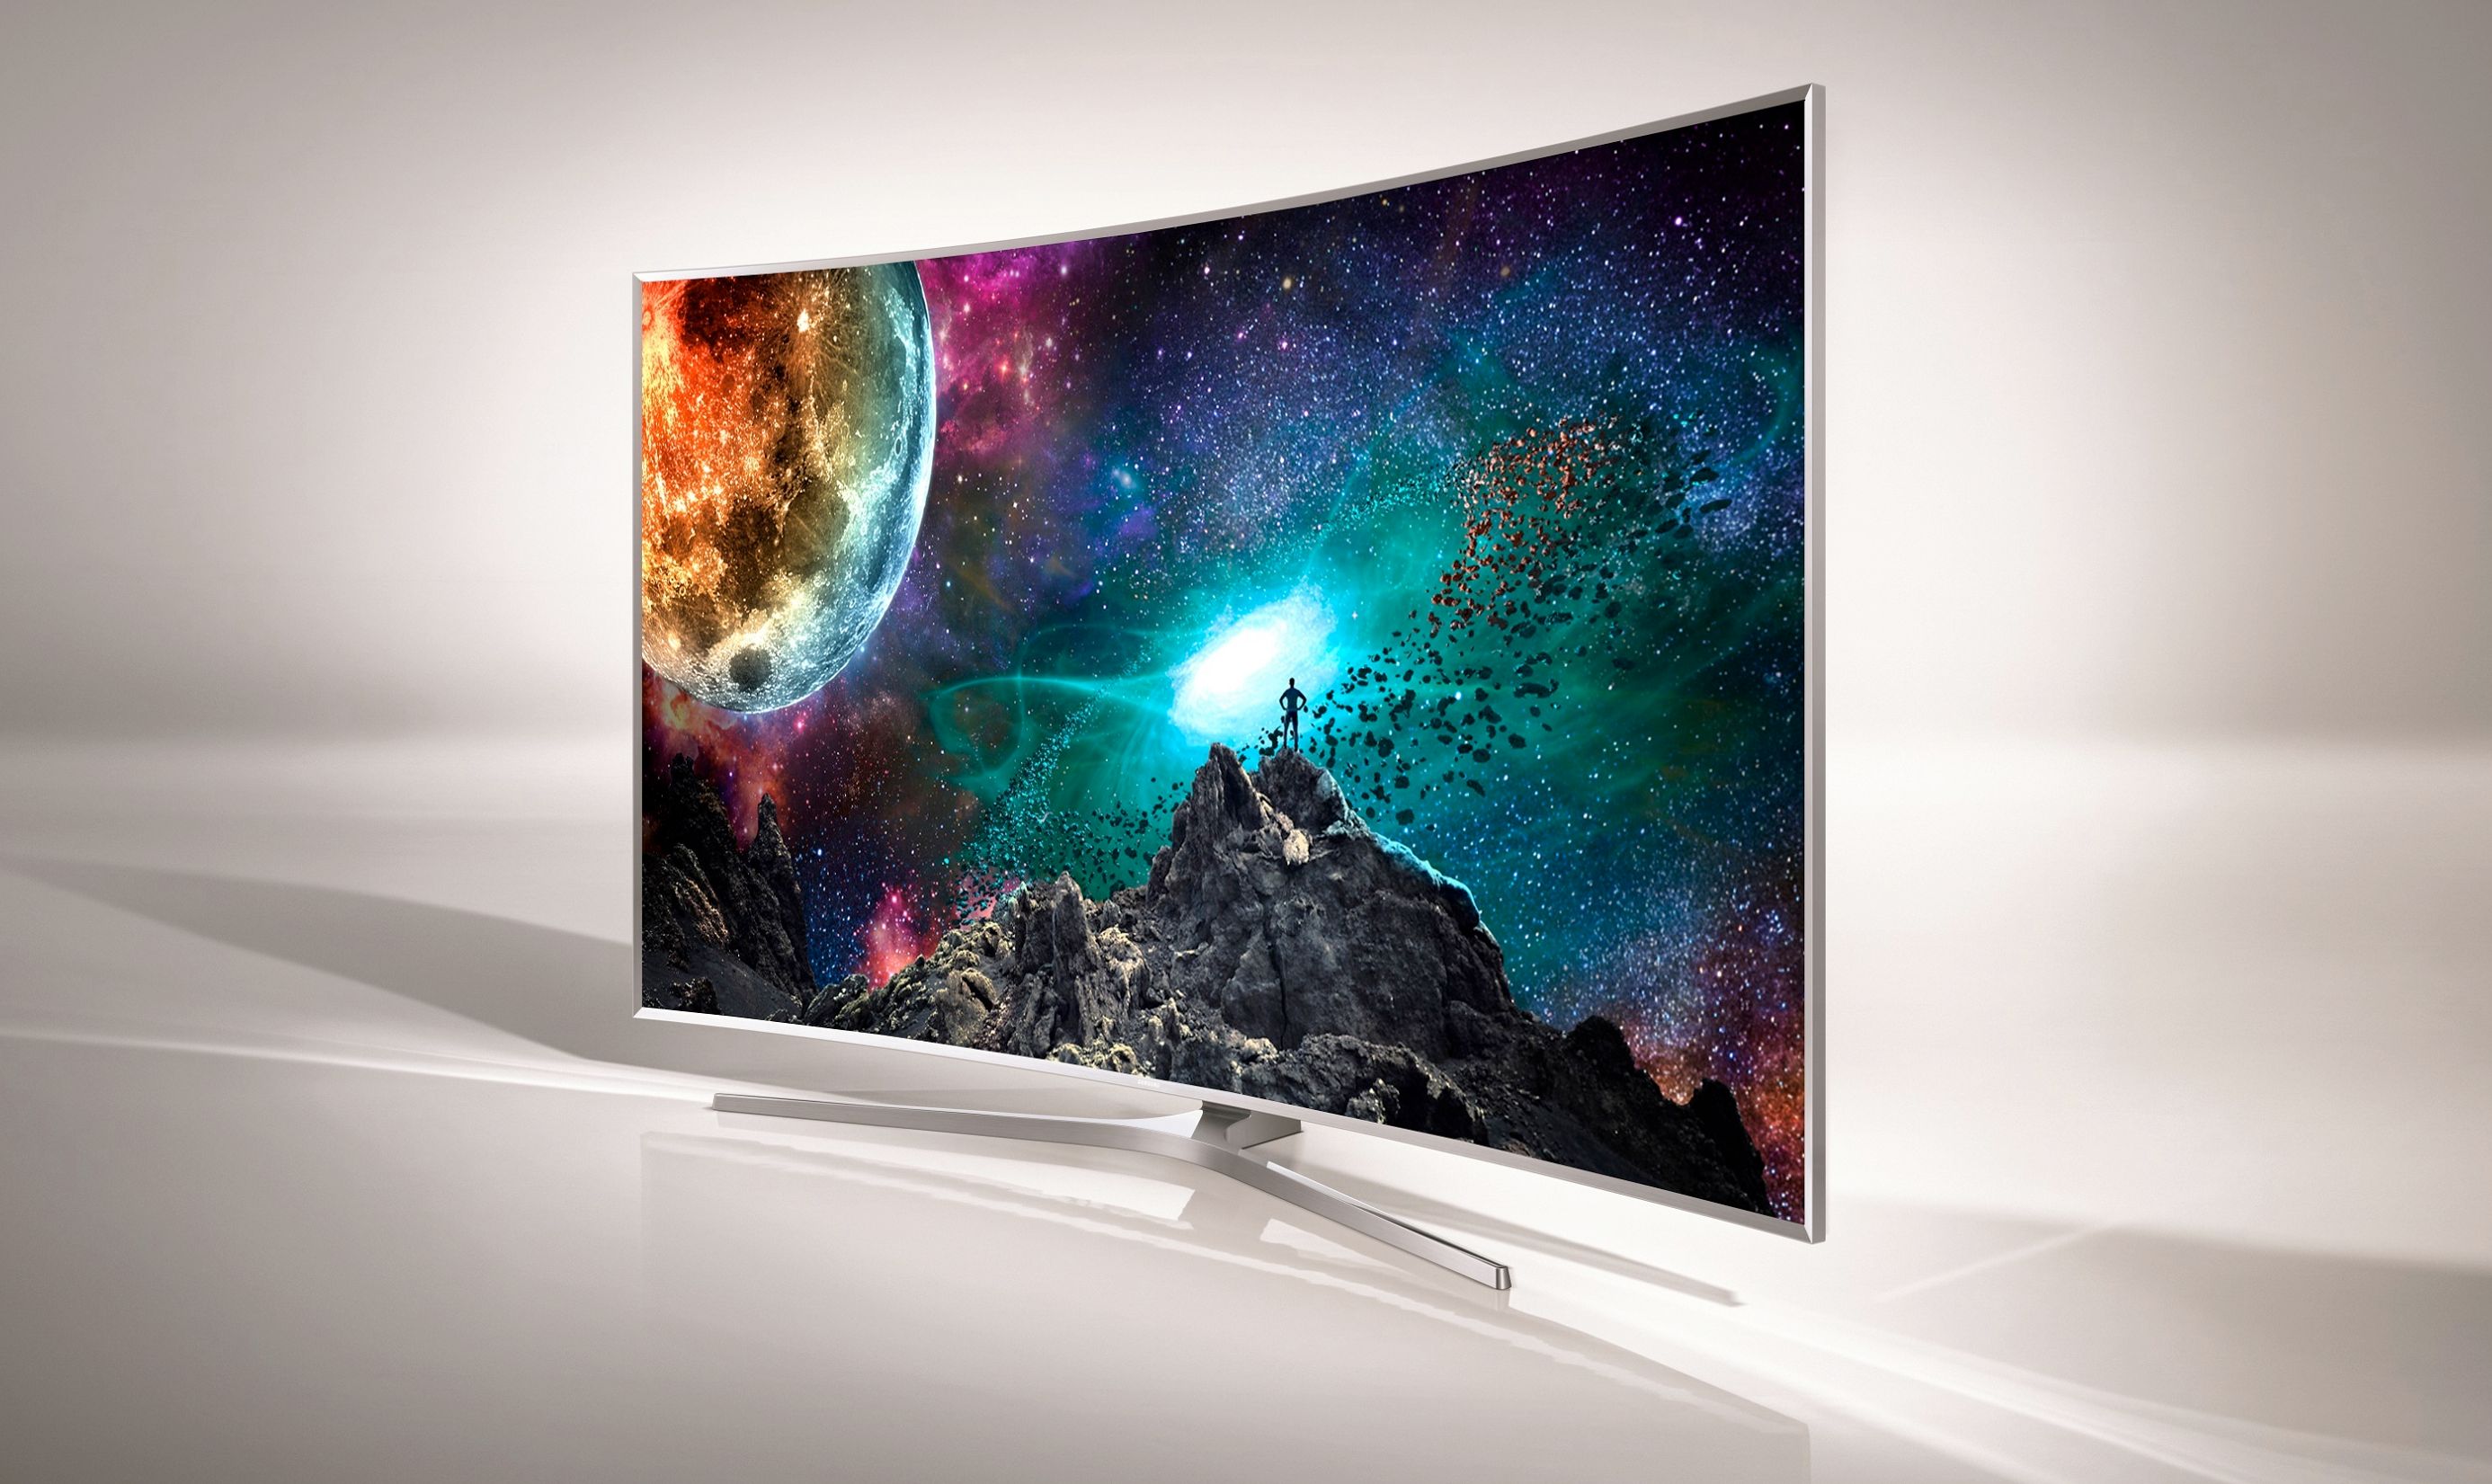 samsung launches its tizen suhd tvs in the us here s how much they cost image 1